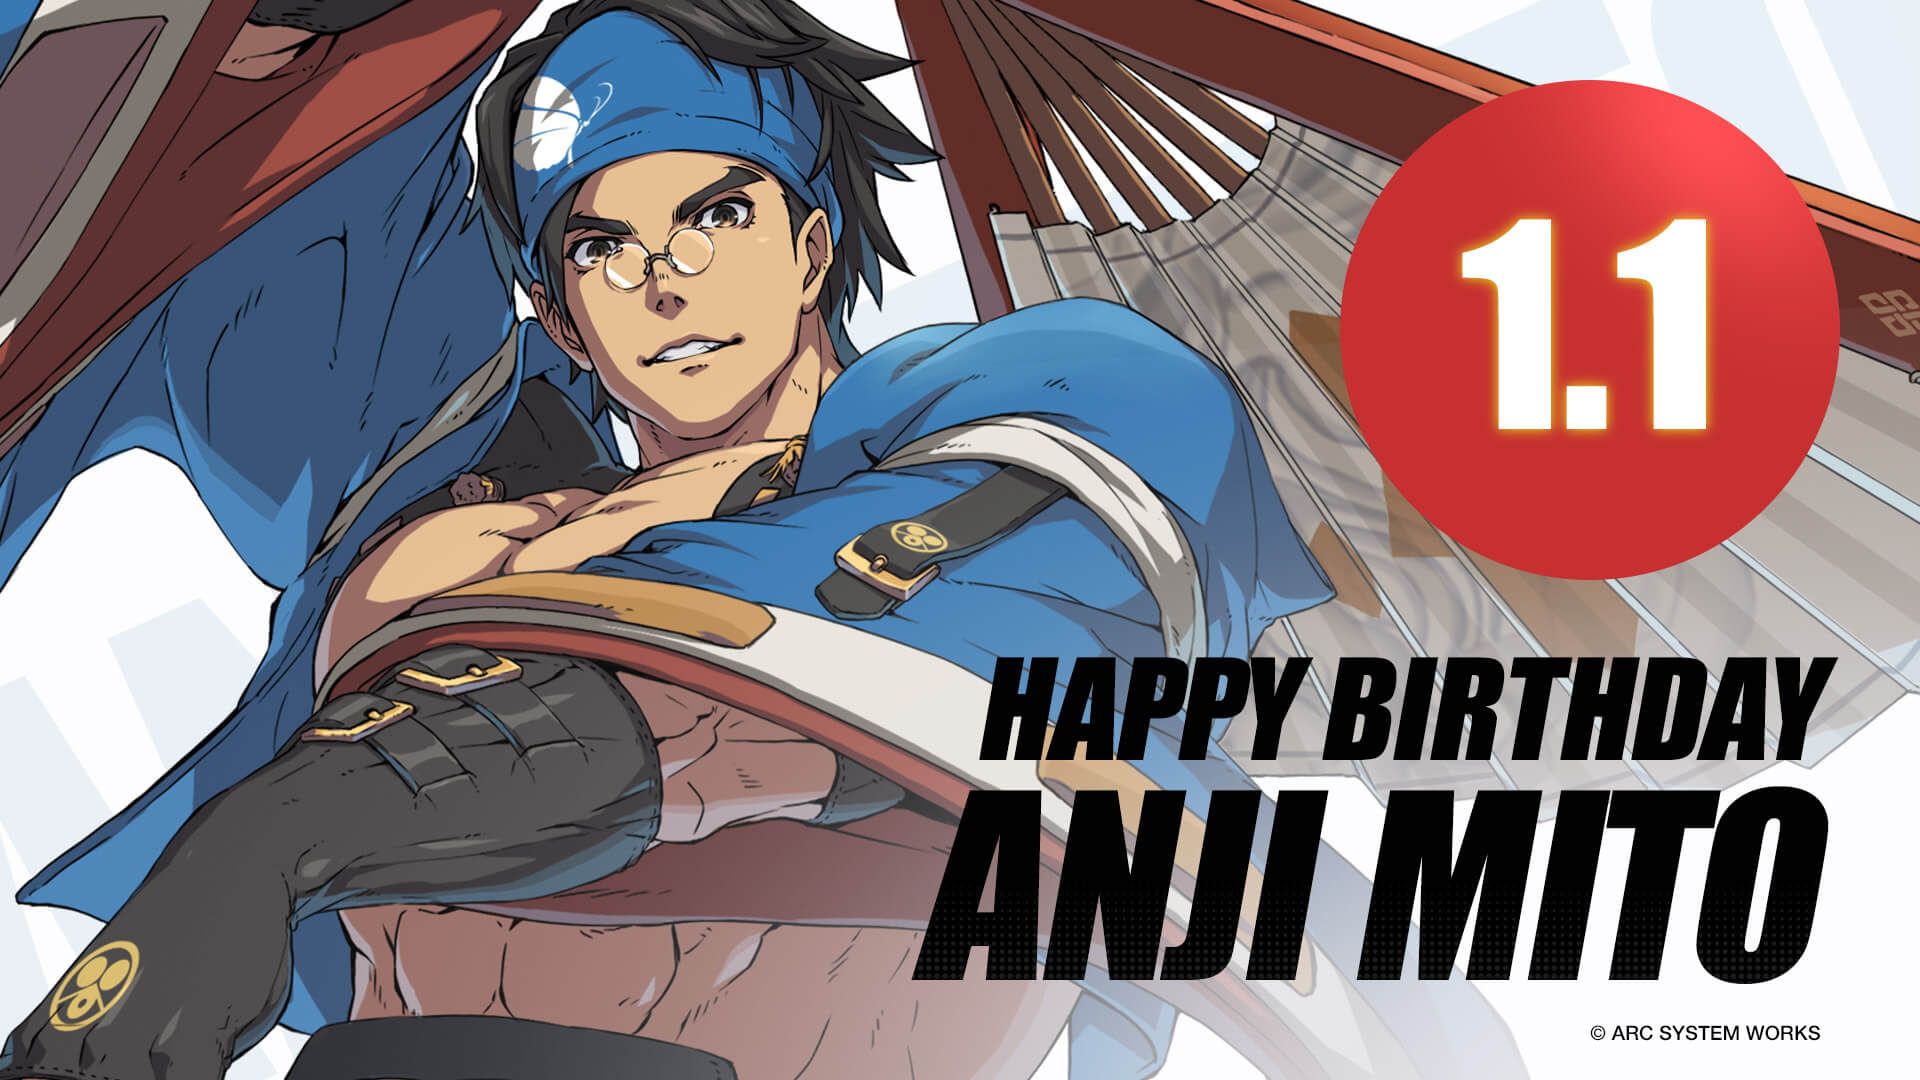 It's Anji Mito's Special Day